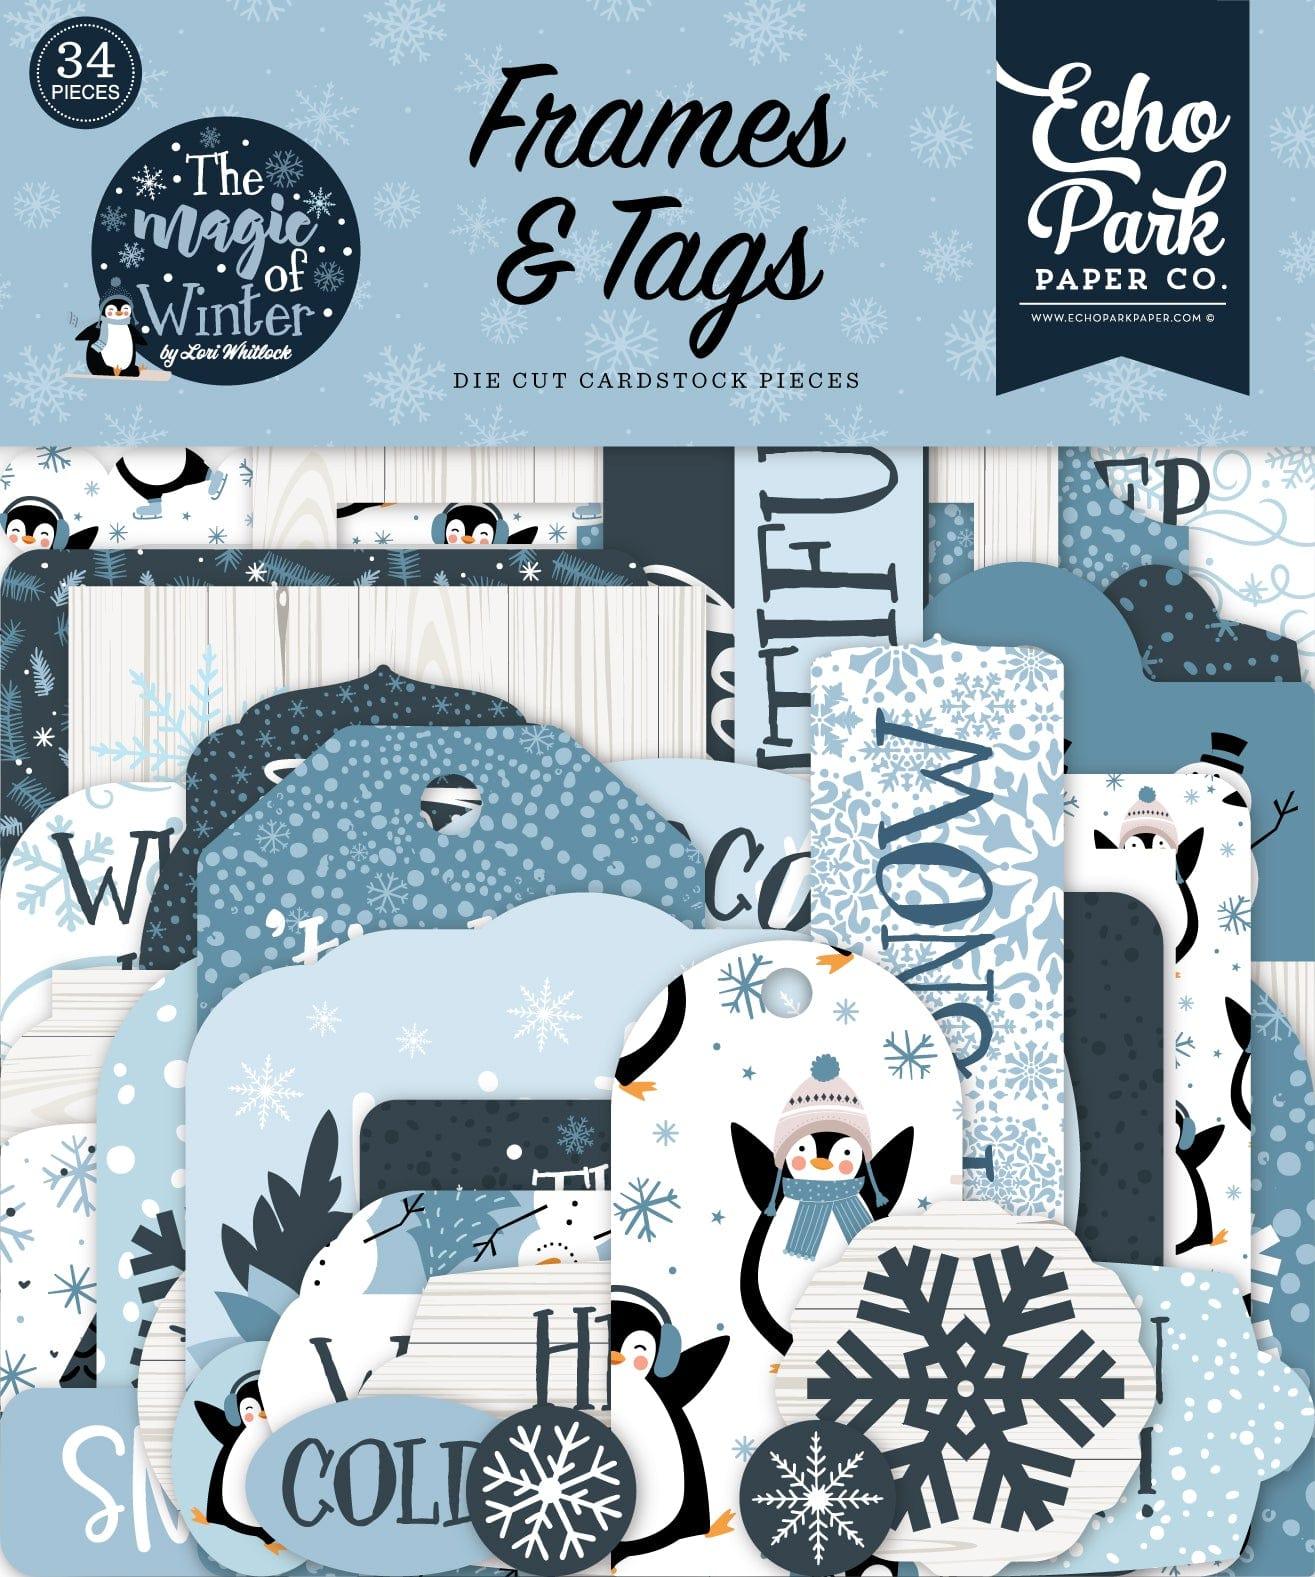 The Magic of Winter Collection 5 x 5 Scrapbook Tags & Frames Die Cuts by Echo Park Paper - Scrapbook Supply Companies